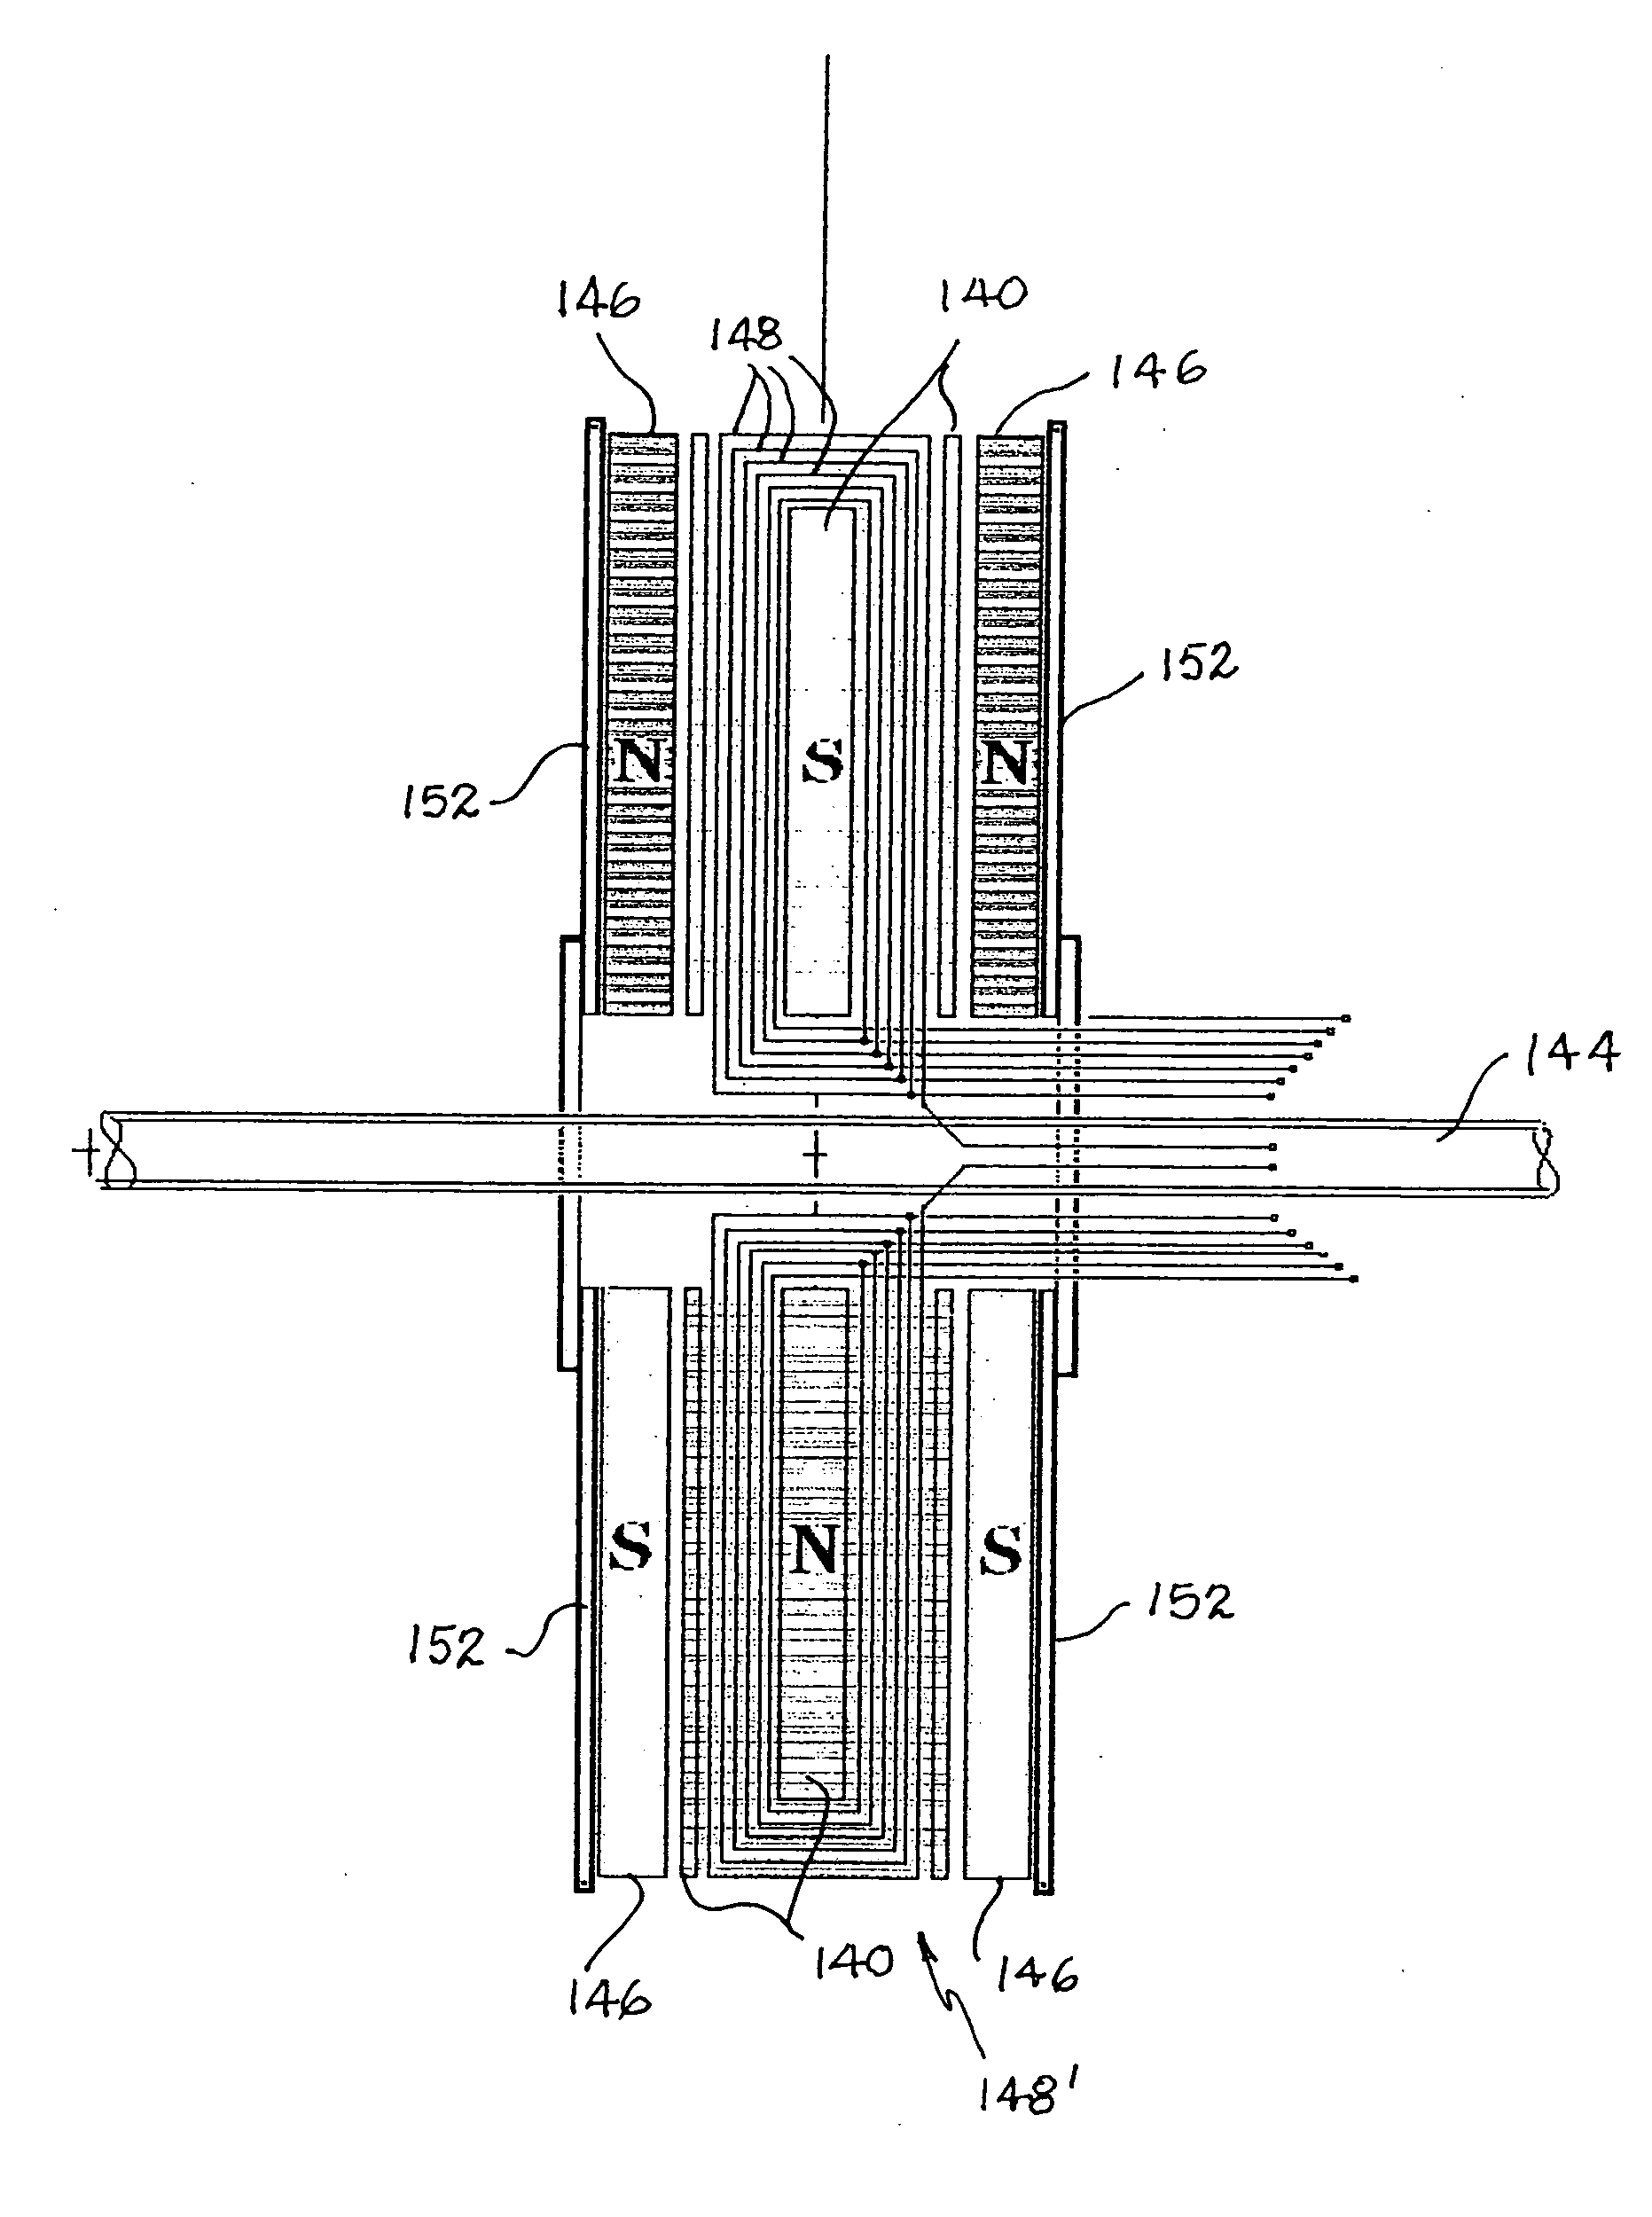 Monopole field electric motor-generator with switchable coil configuration